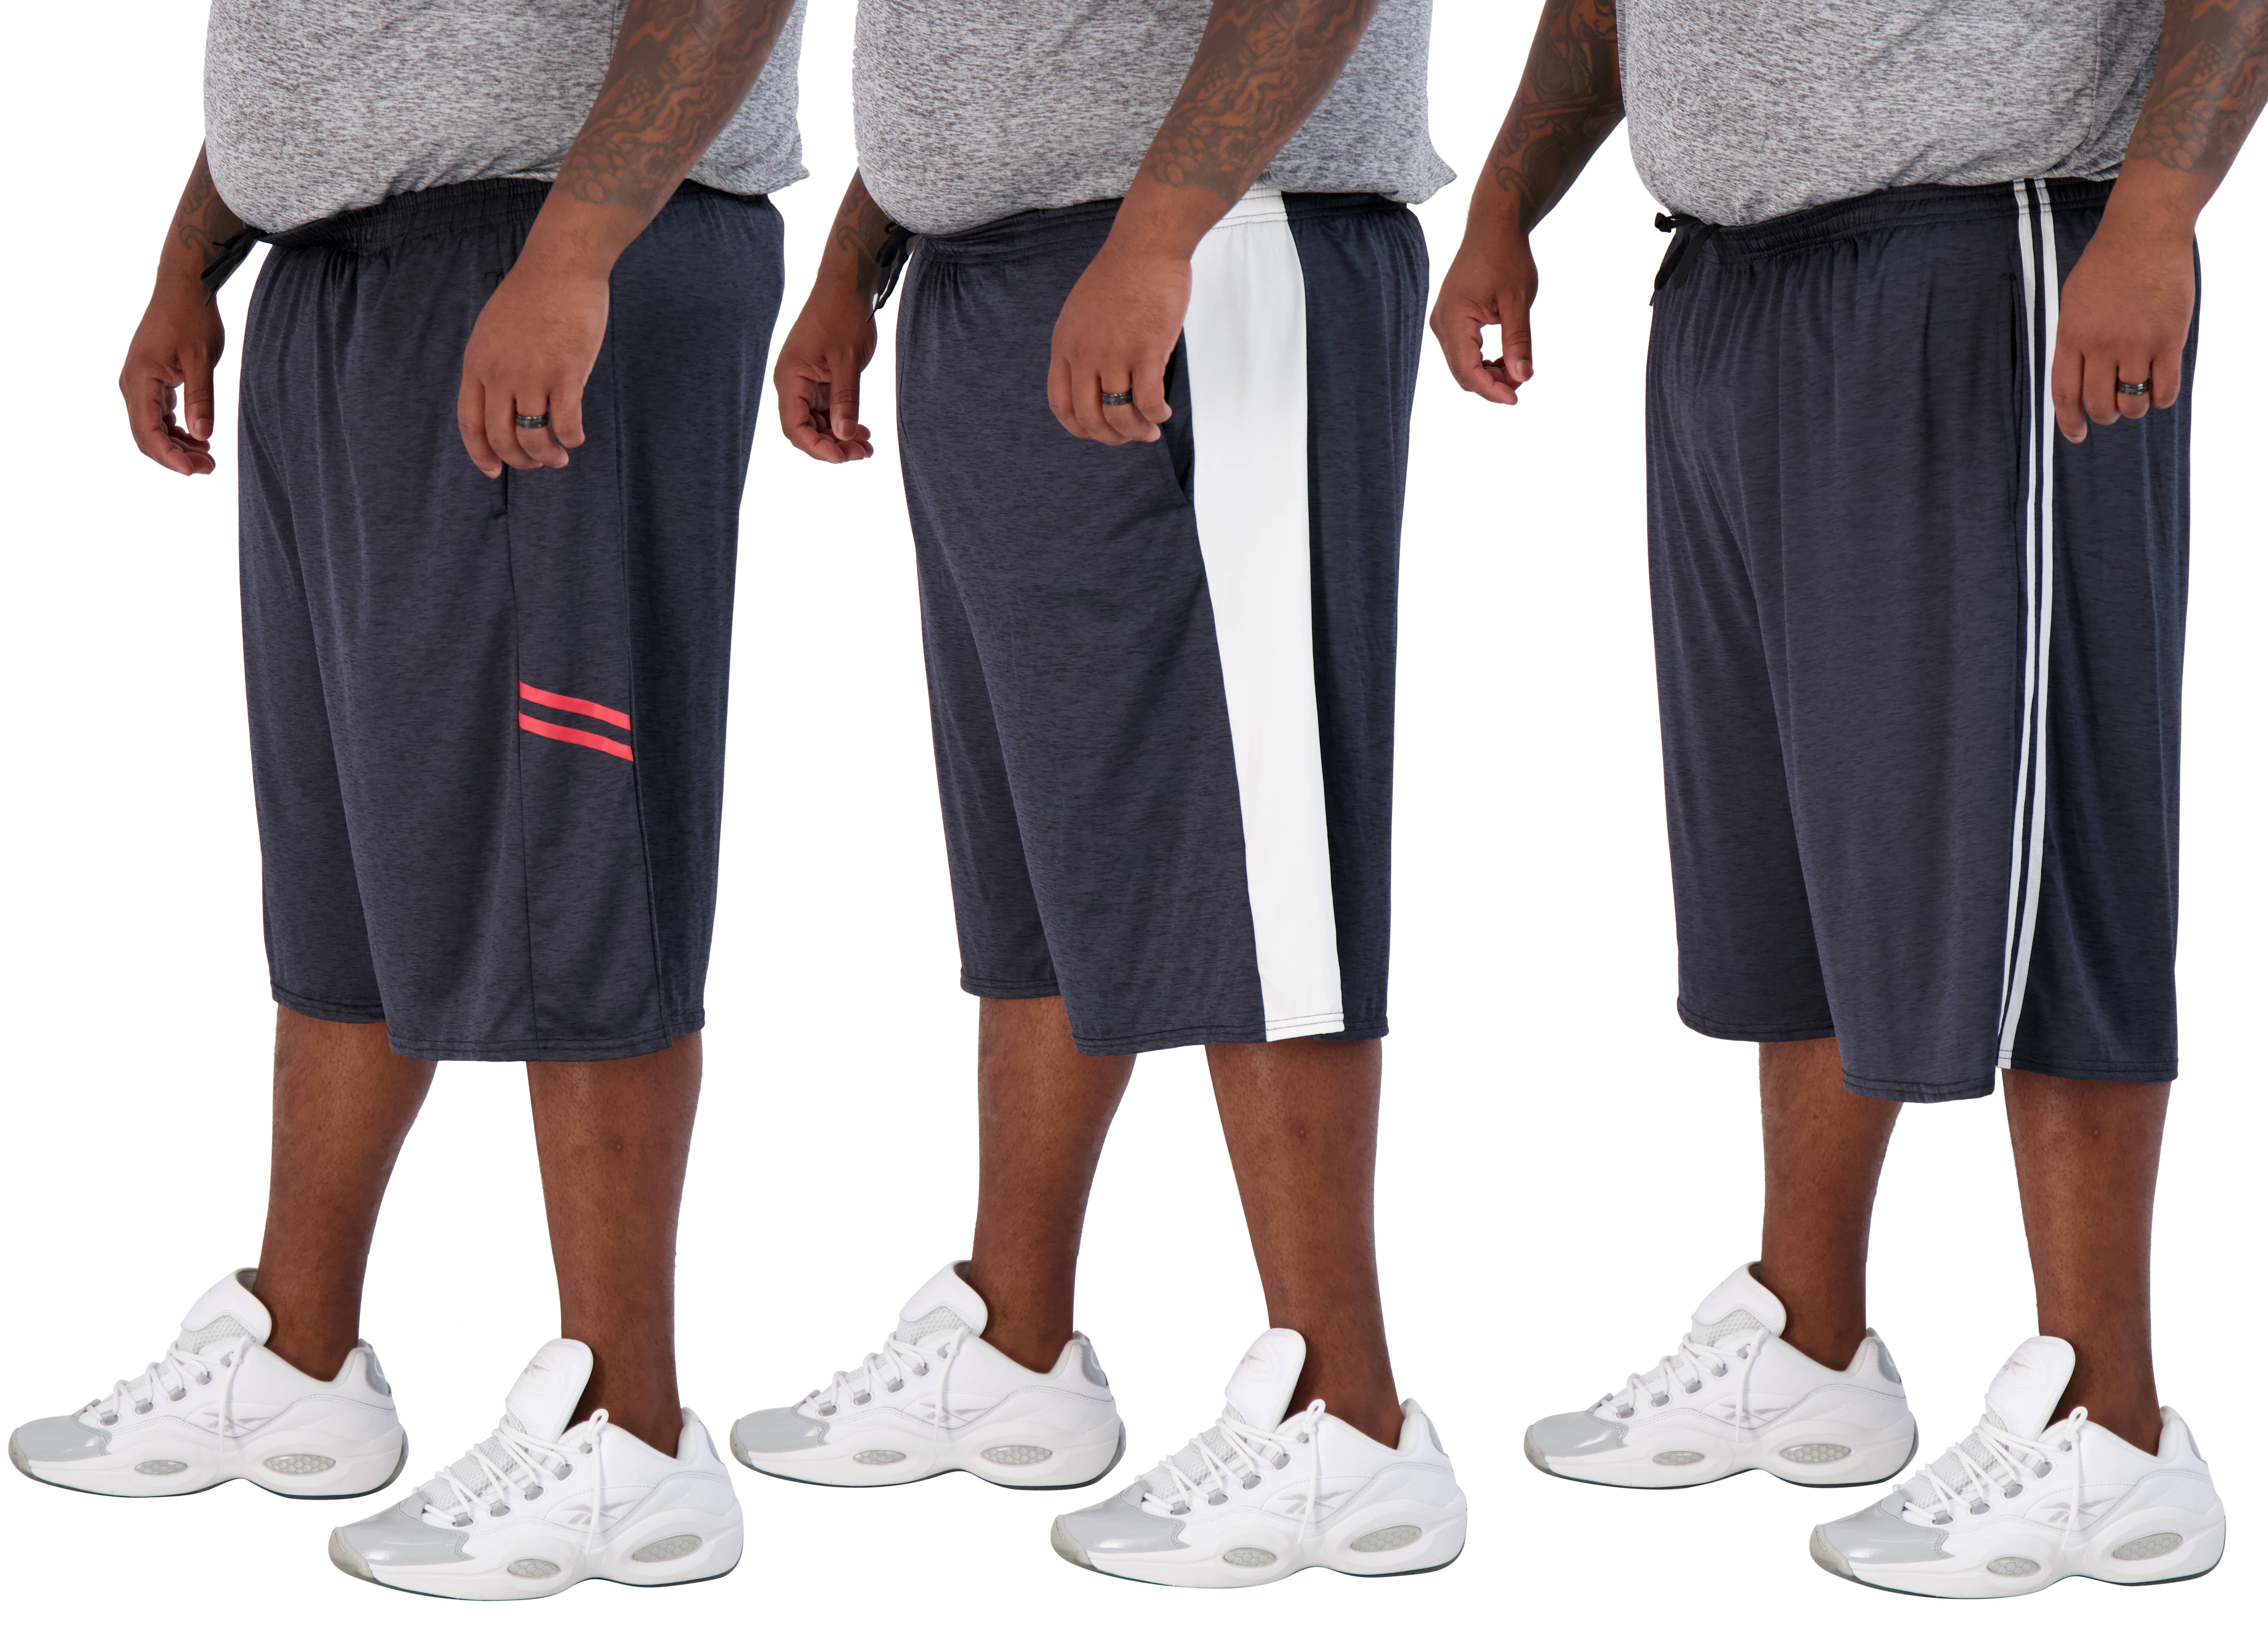 3X-5X Real Essentials Men's Big & Tall 3-Pack Dry Fit & Mesh Active Athletic Perfomance Shorts 